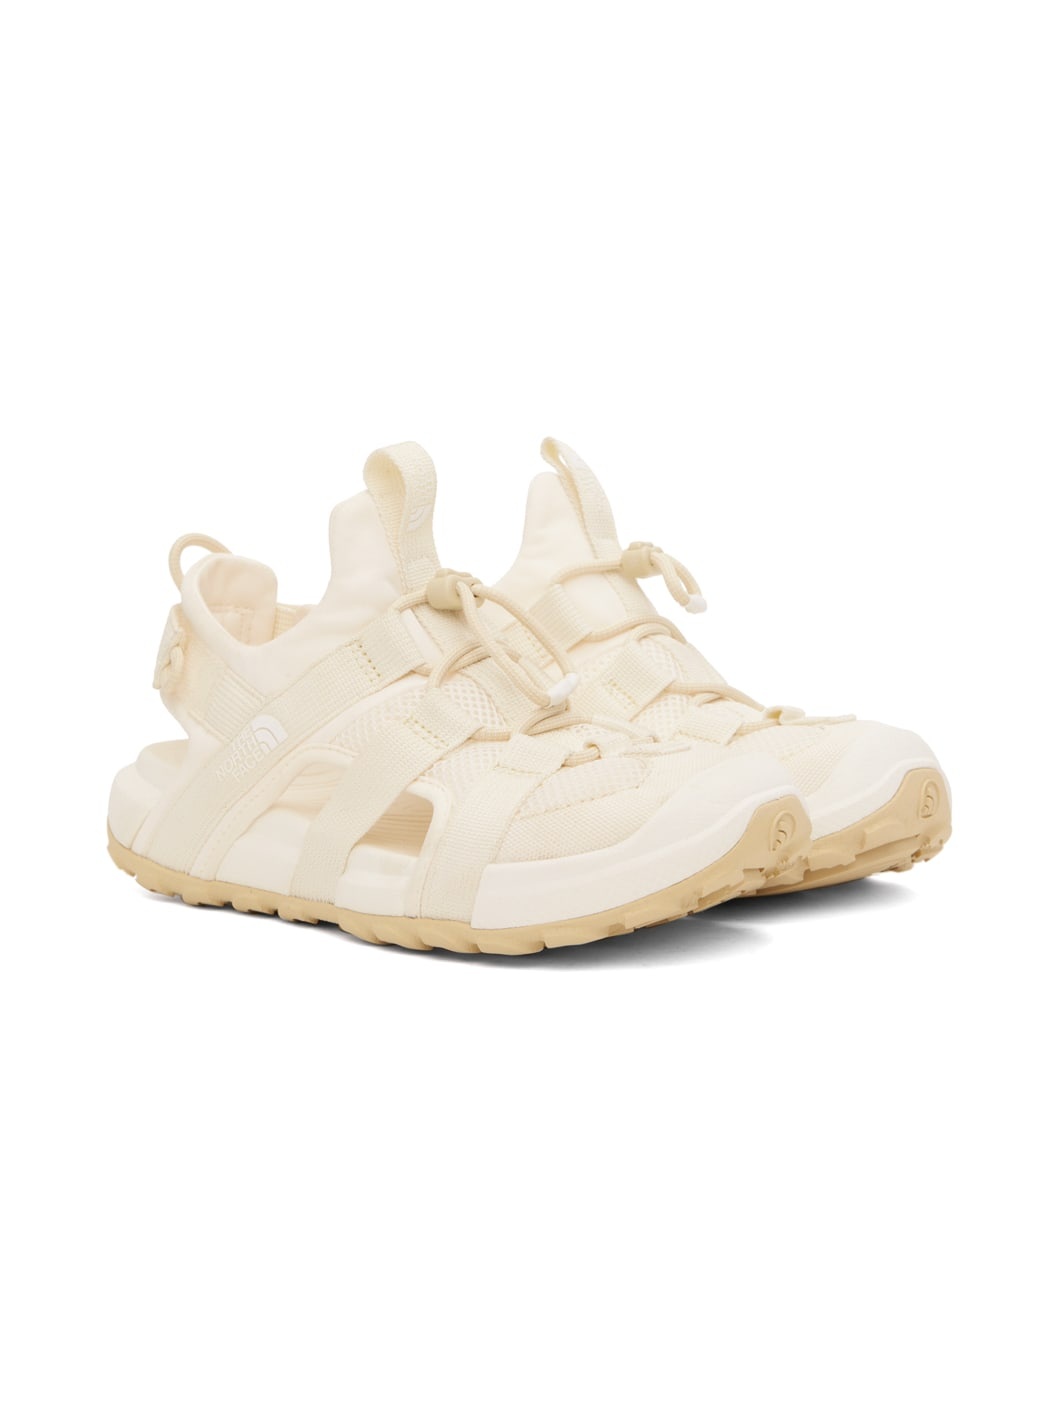 Off-White Explore Camp Sneakers - 4